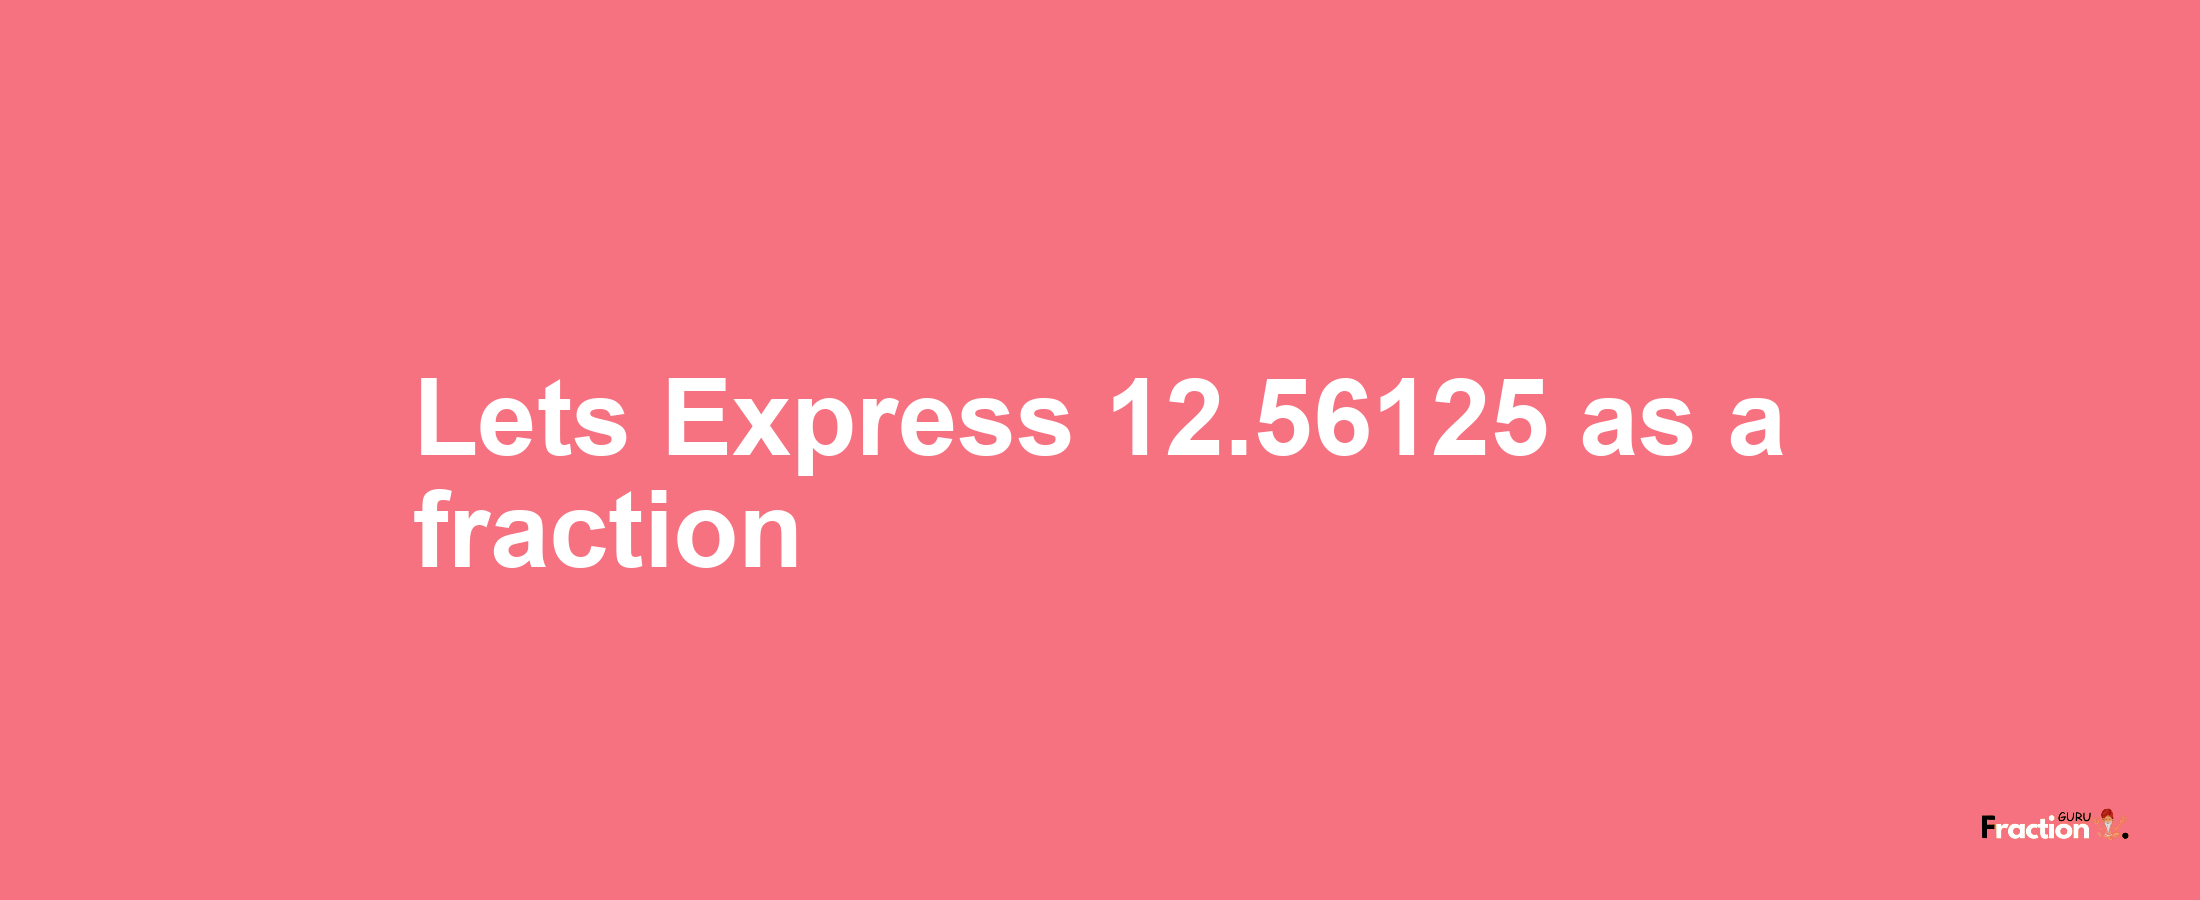 Lets Express 12.56125 as afraction